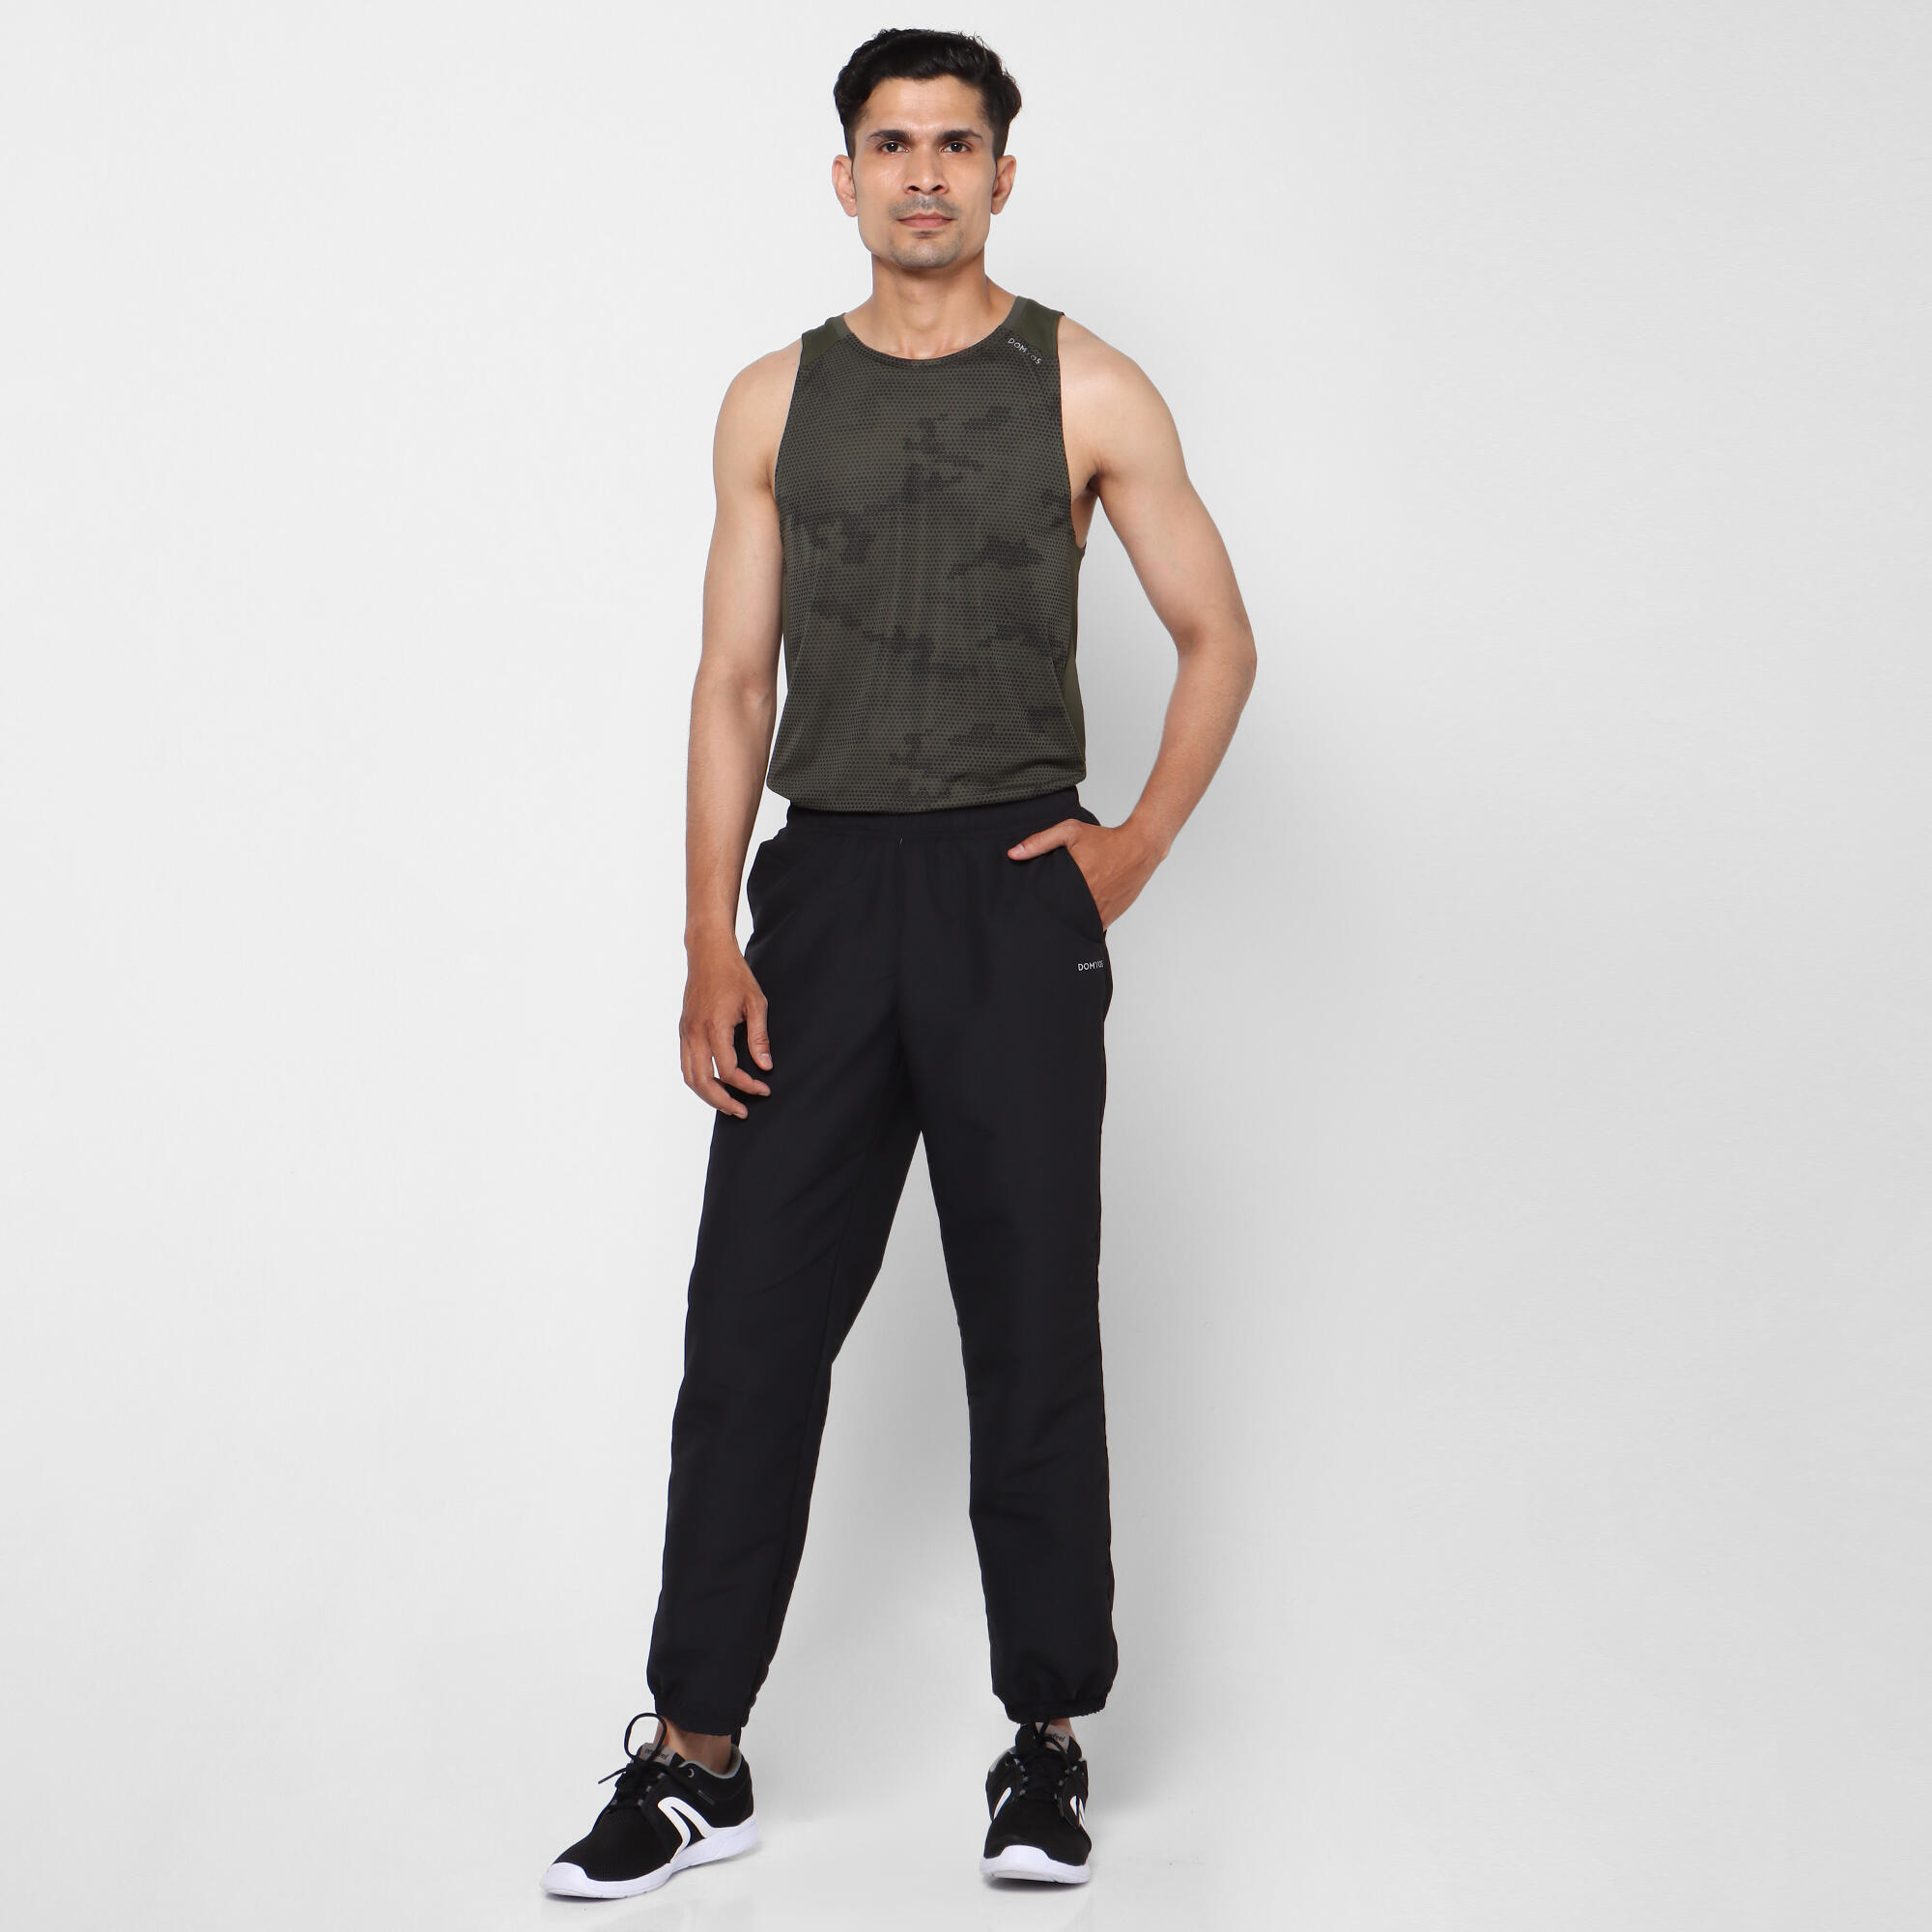 FLX by Decathlon Solid Men Grey Track Pants - Buy FLX by Decathlon Solid Men  Grey Track Pants Online at Best Prices in India | Flipkart.com